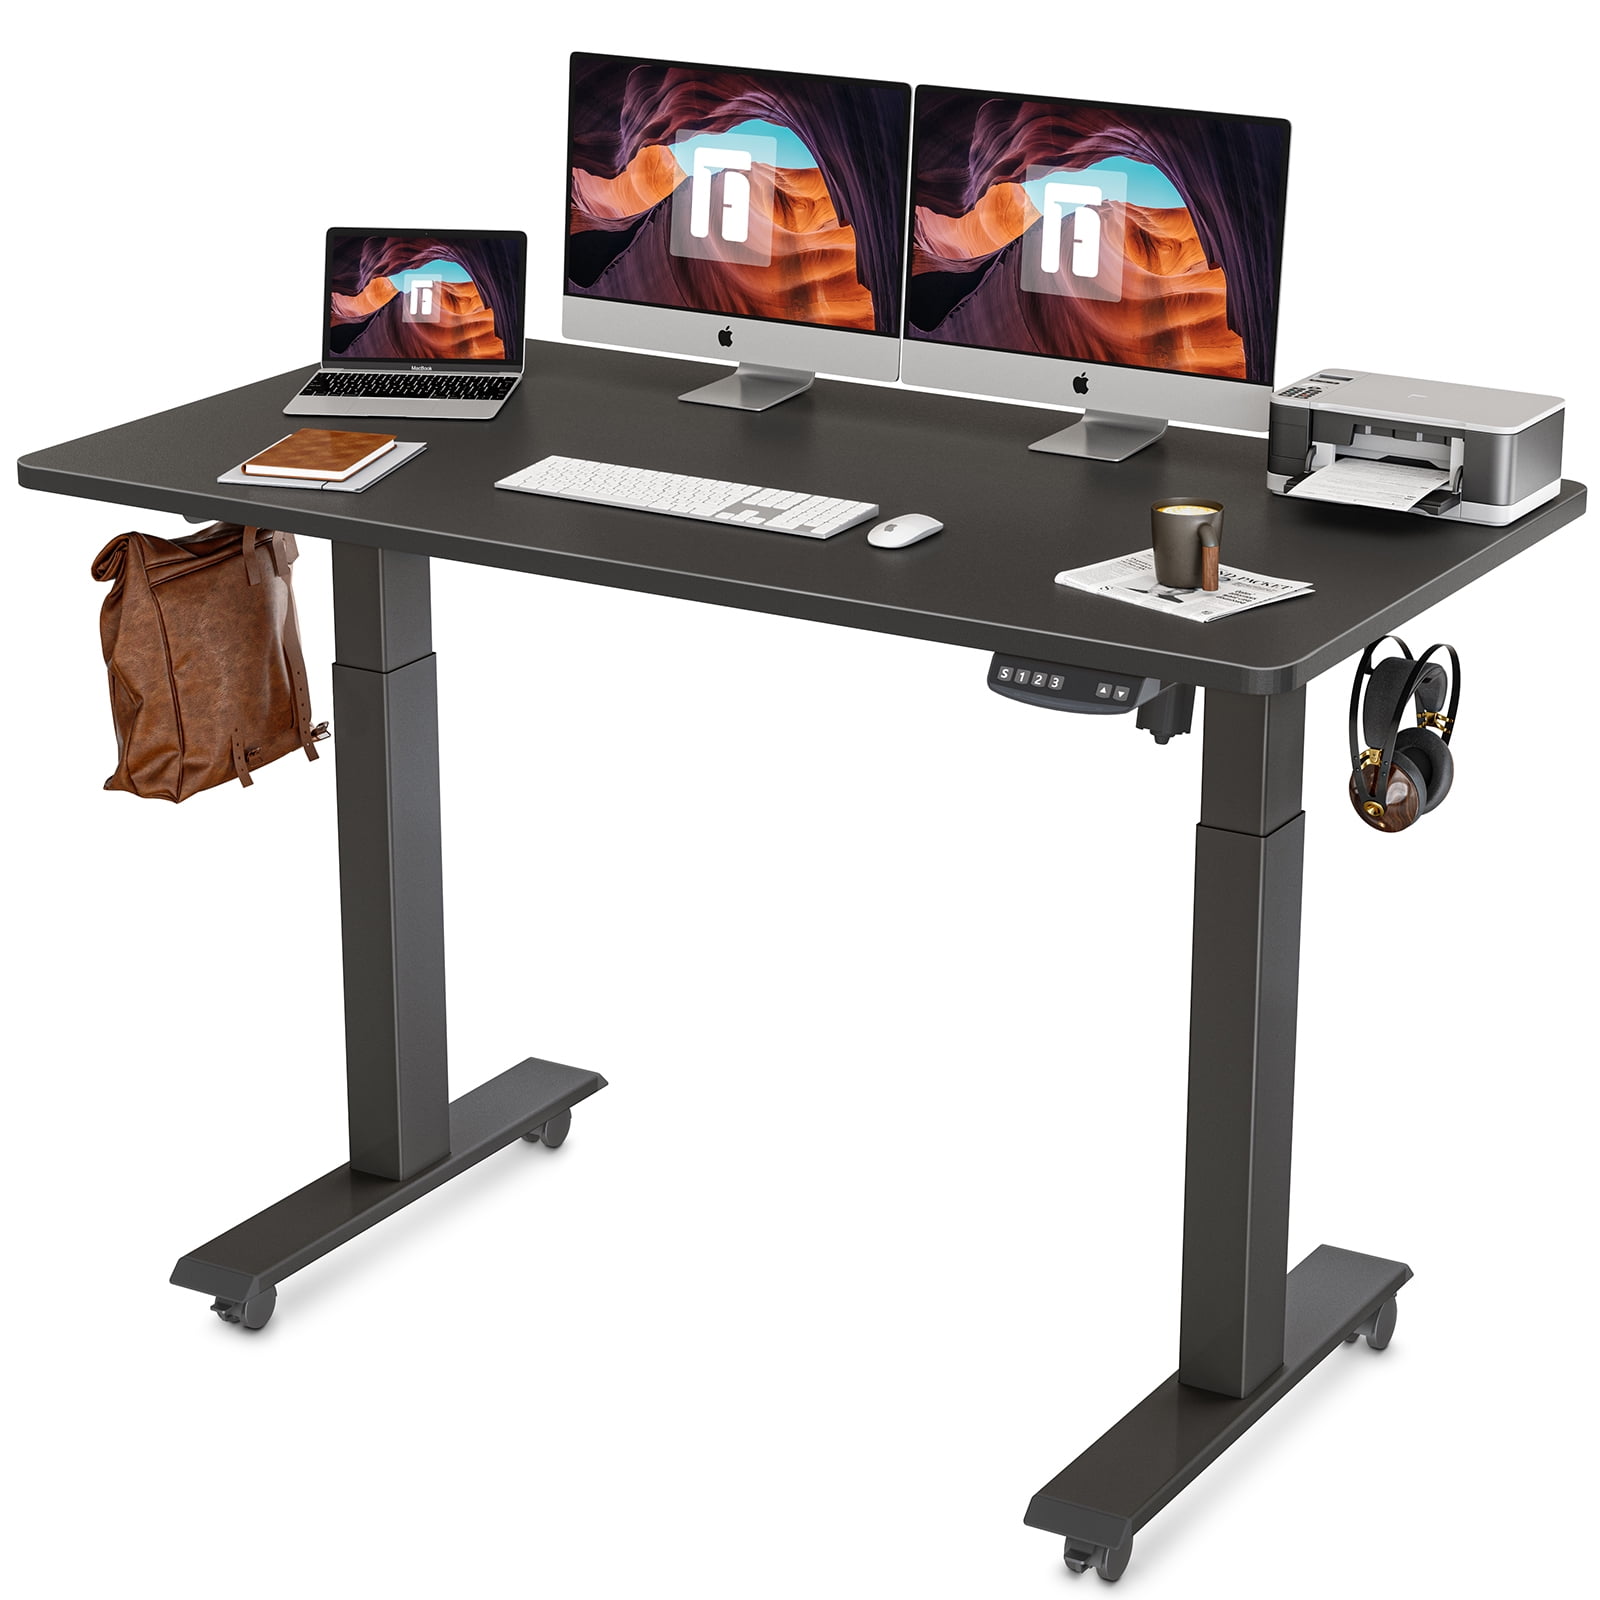 Rustic Brown and Black Top POXURIO Electric Height Adjustable Standing Desk Height Memorable Sit Stand Up Lift Computer Desk with Drawer and Hook 55 x 24 Inch Workstation Table with Splice Board 